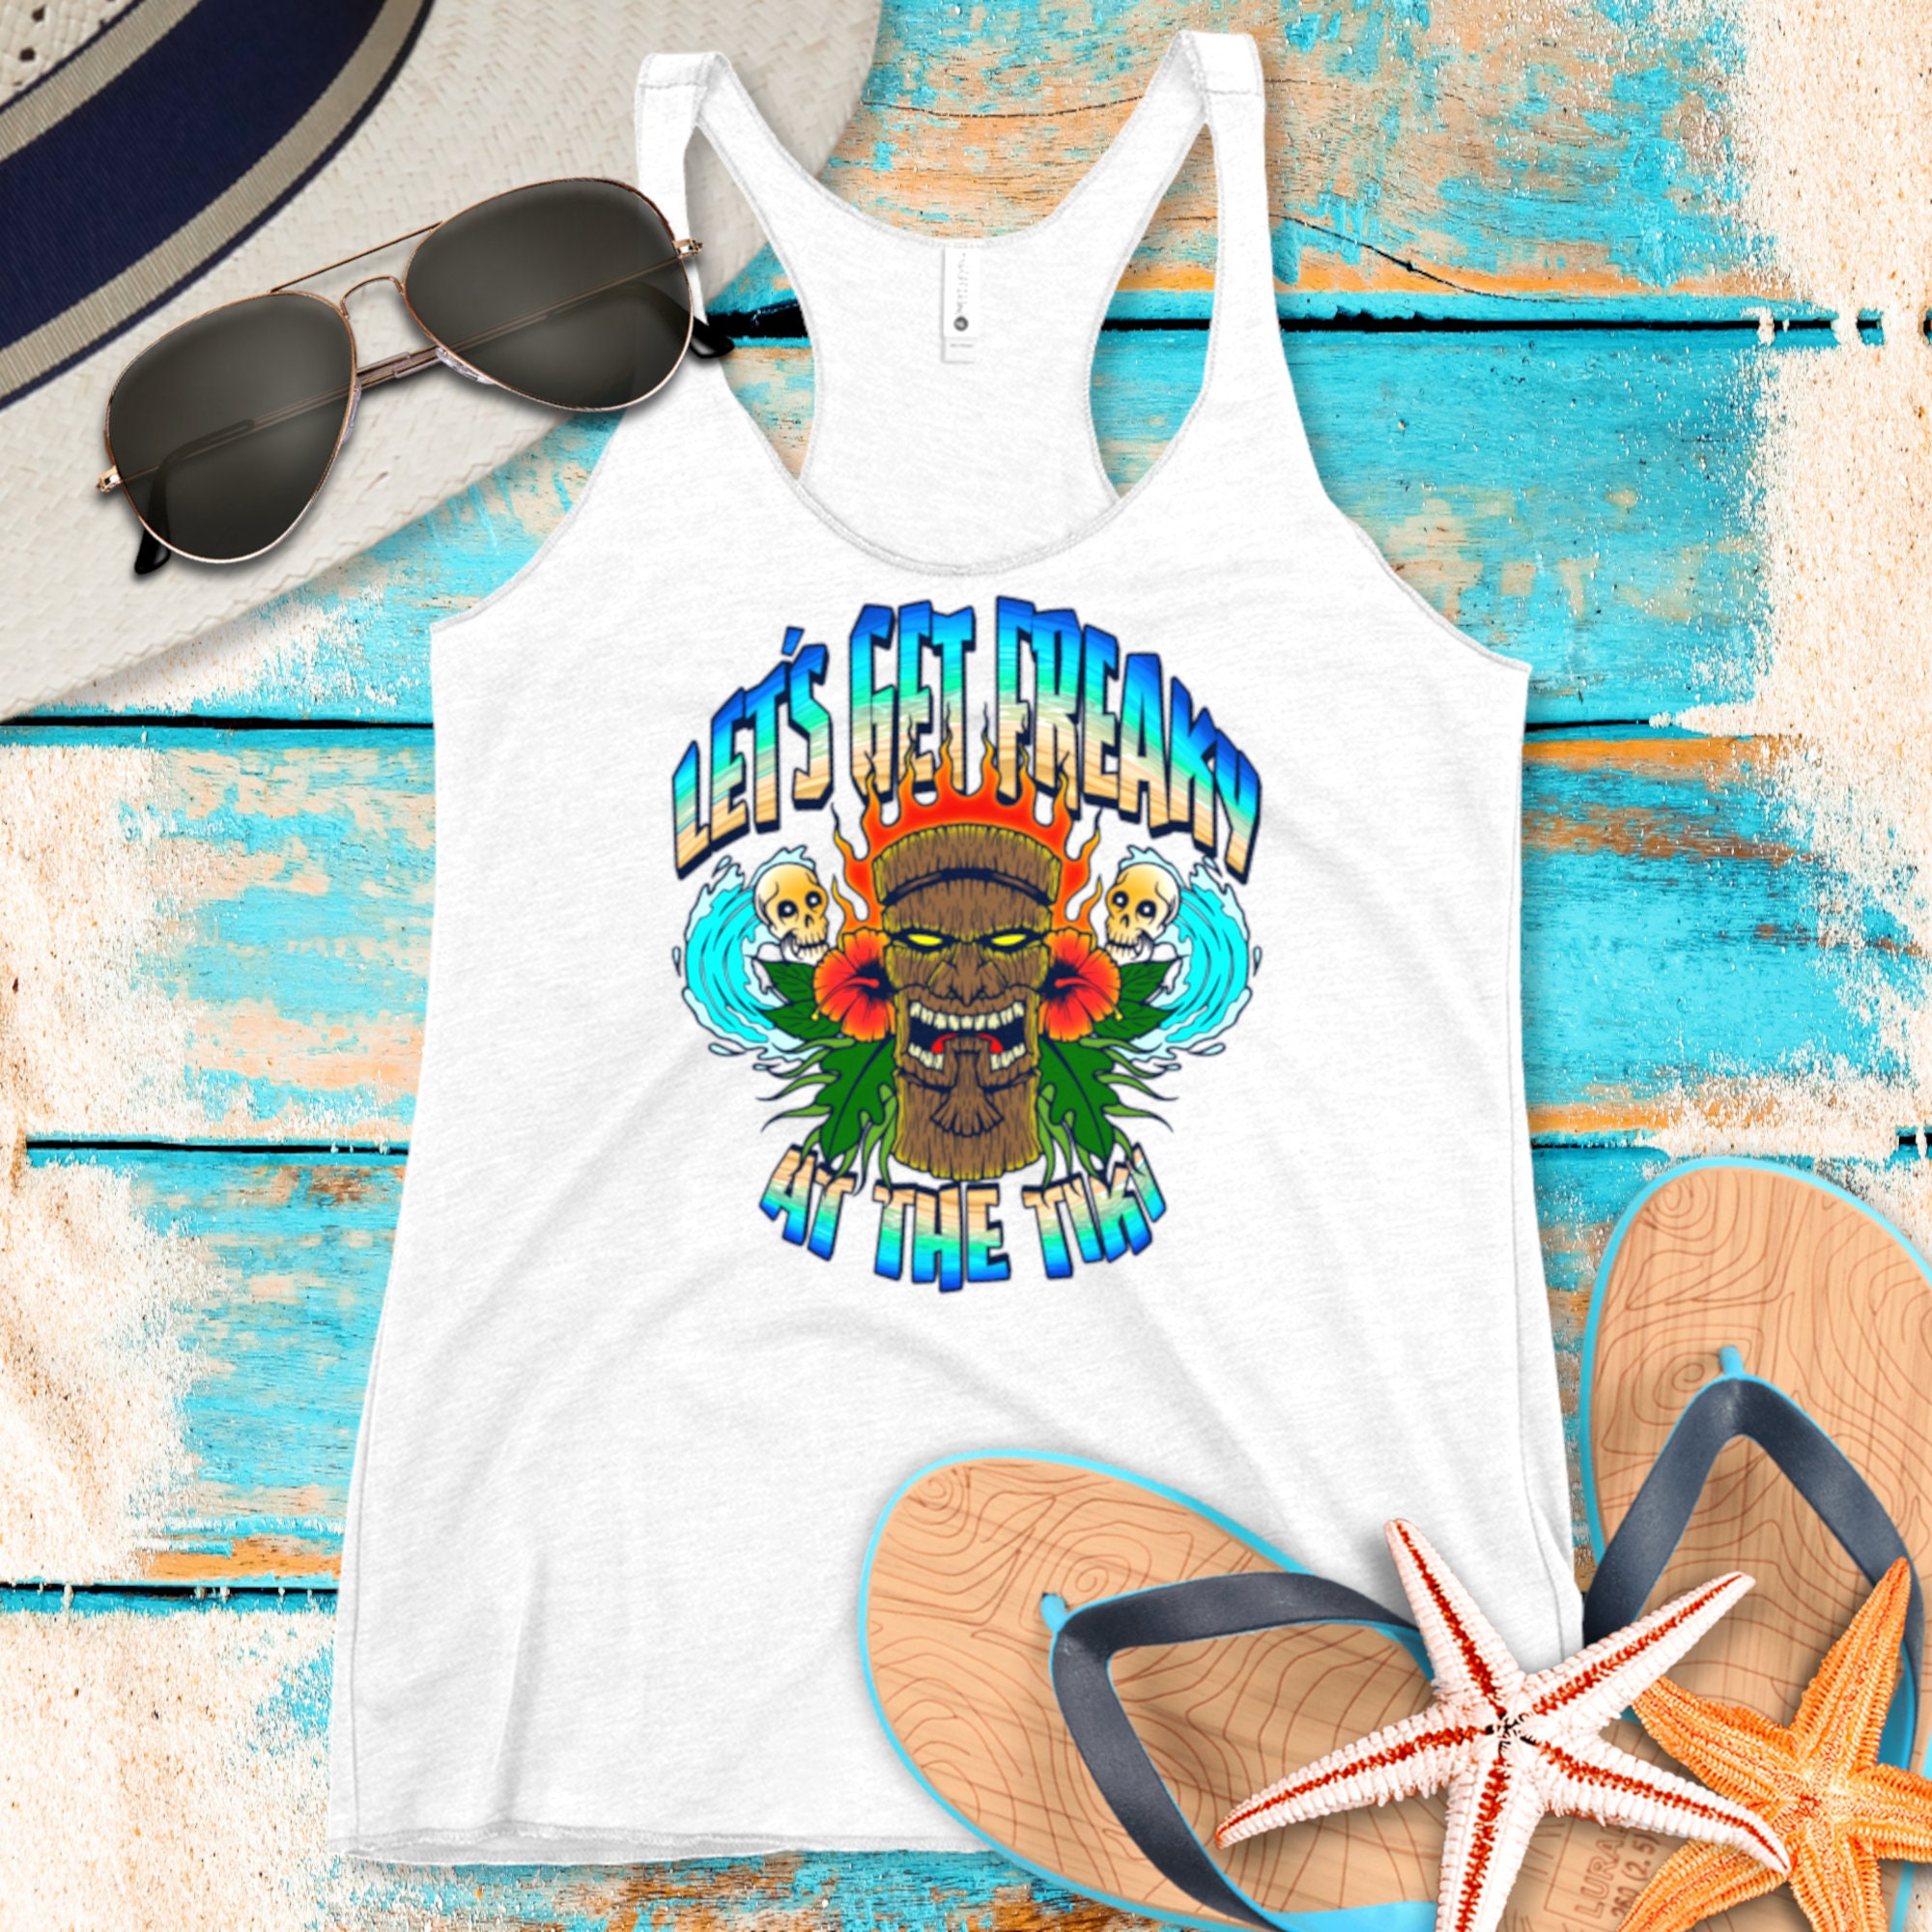 Let's Get Freaky At The Tiki Women's Racerback Tank Top